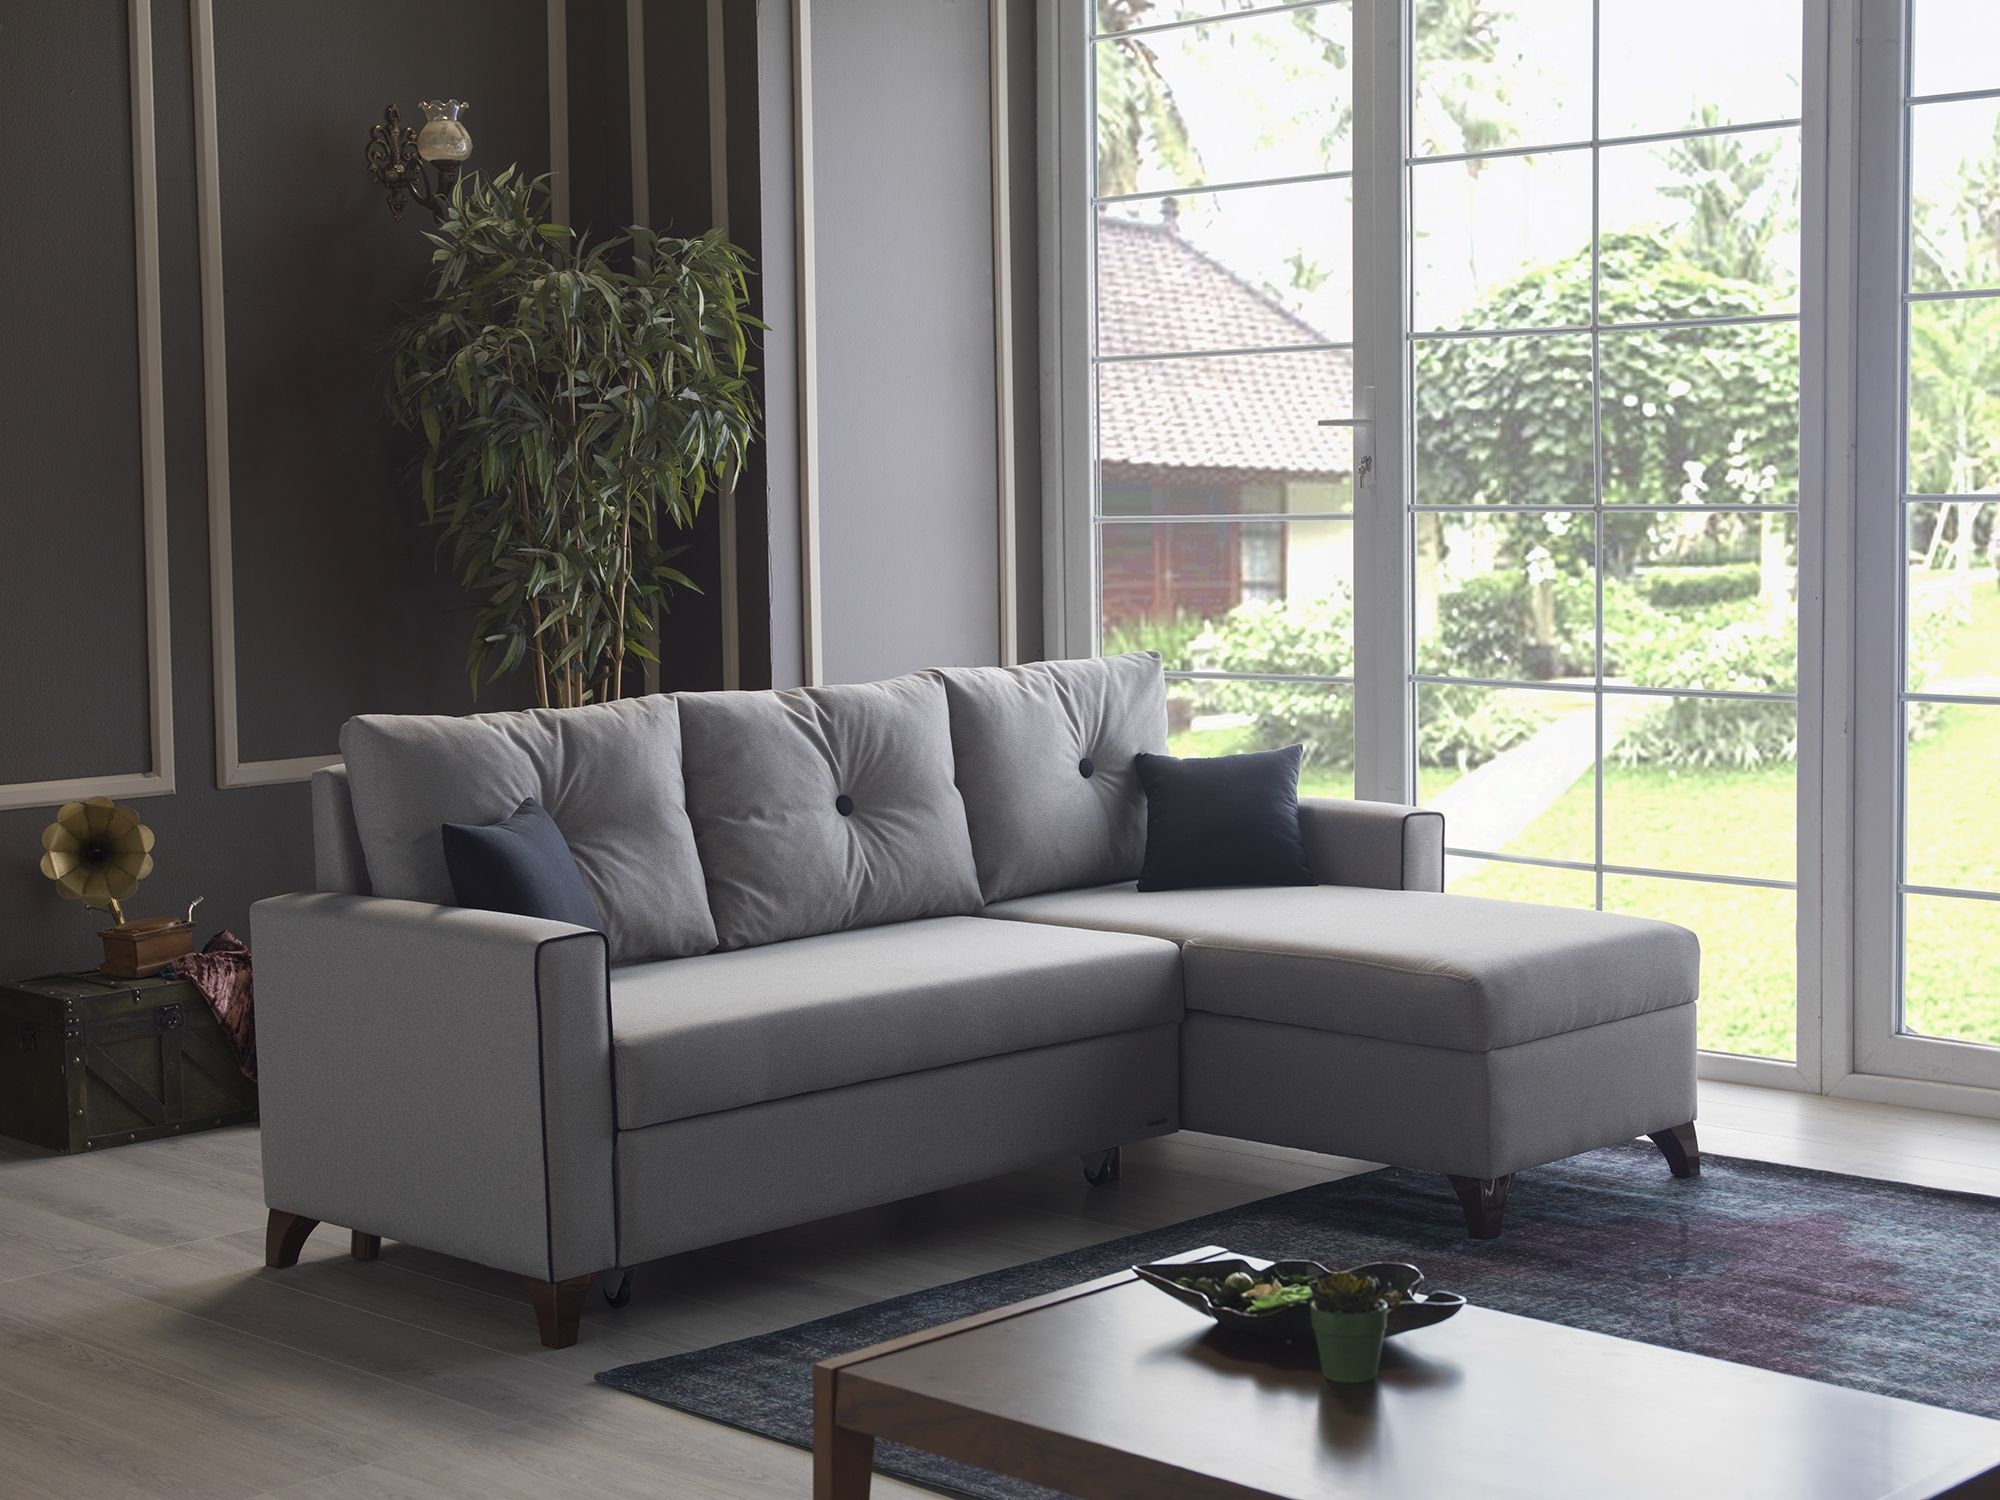 Sealy Sectional Sofa Bed | Baci Living Room Inside Lucy Dark Grey 2 Piece Sectionals With Raf Chaise (View 27 of 30)